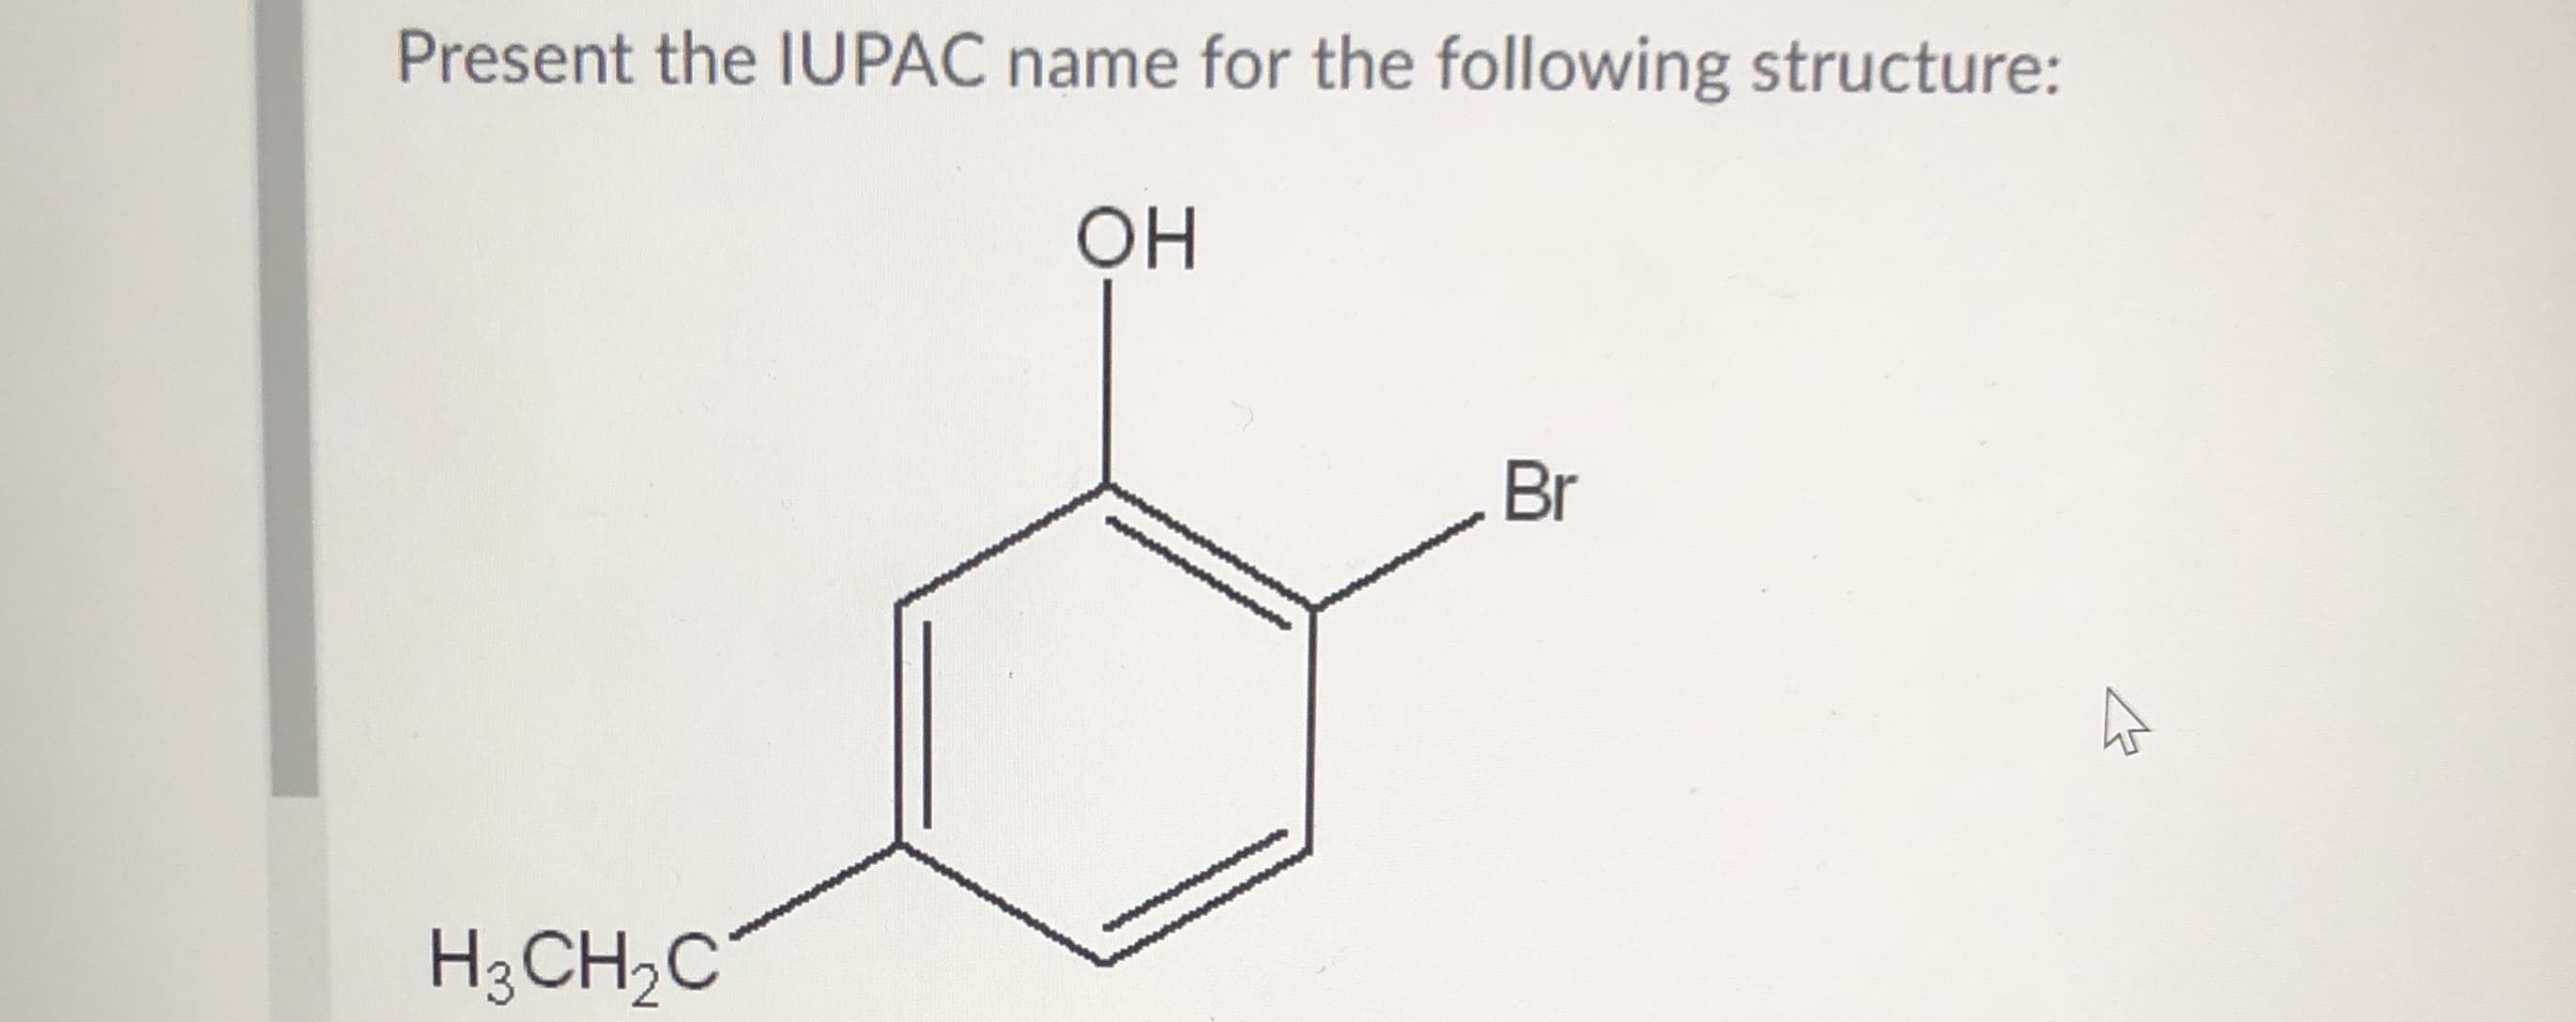 Present the IUPAC name for the following structure:
OH
Br
H3CH,C
